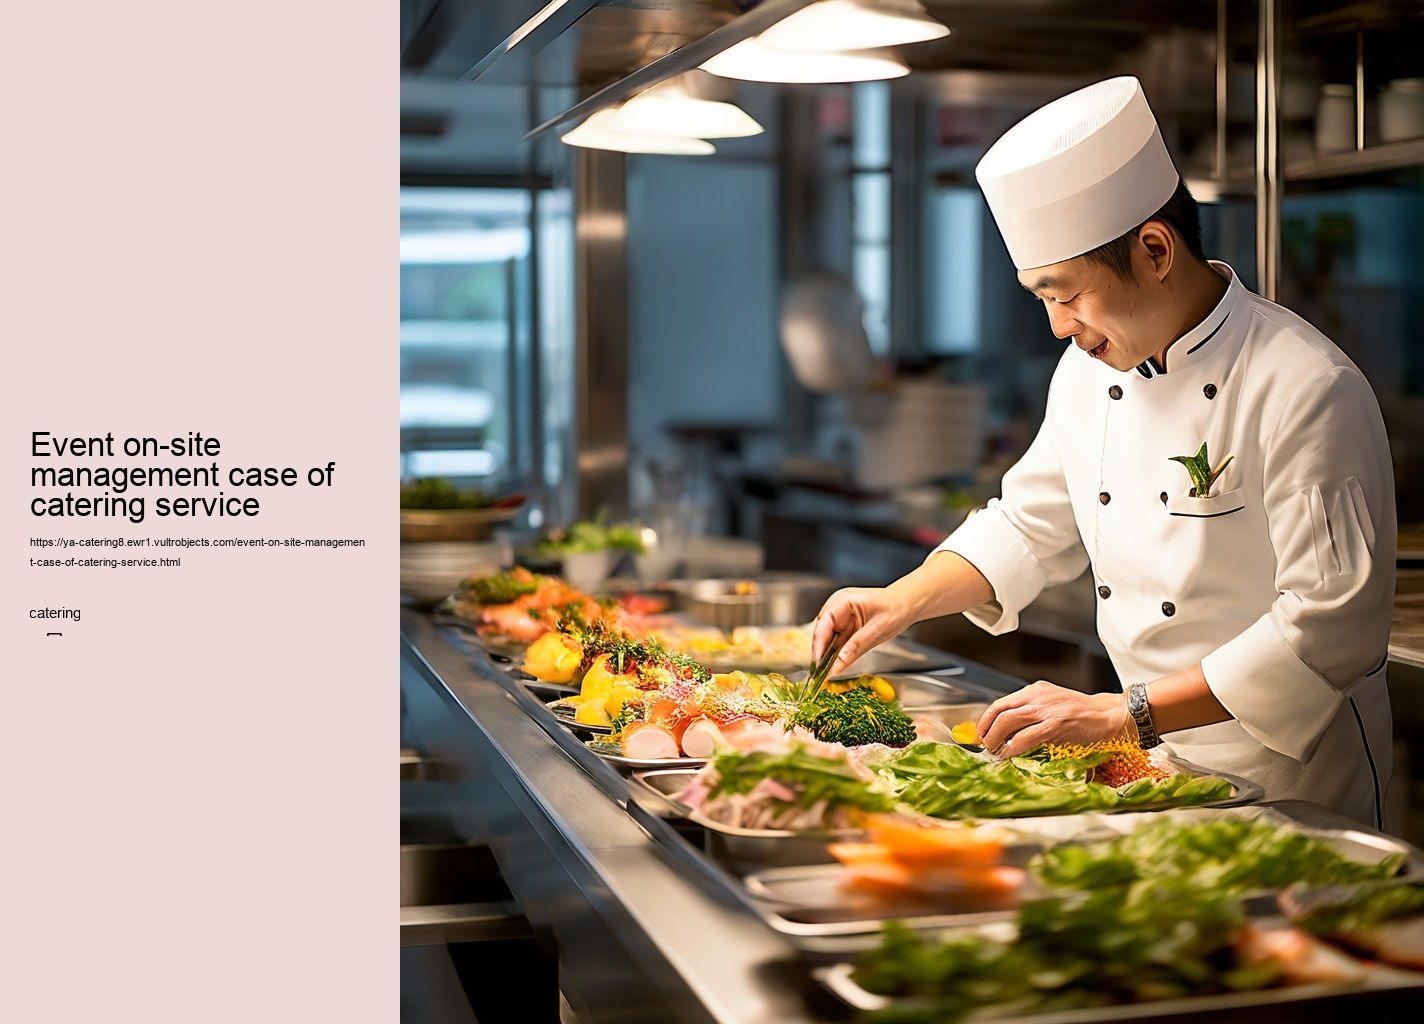 Event on-site management case of catering service